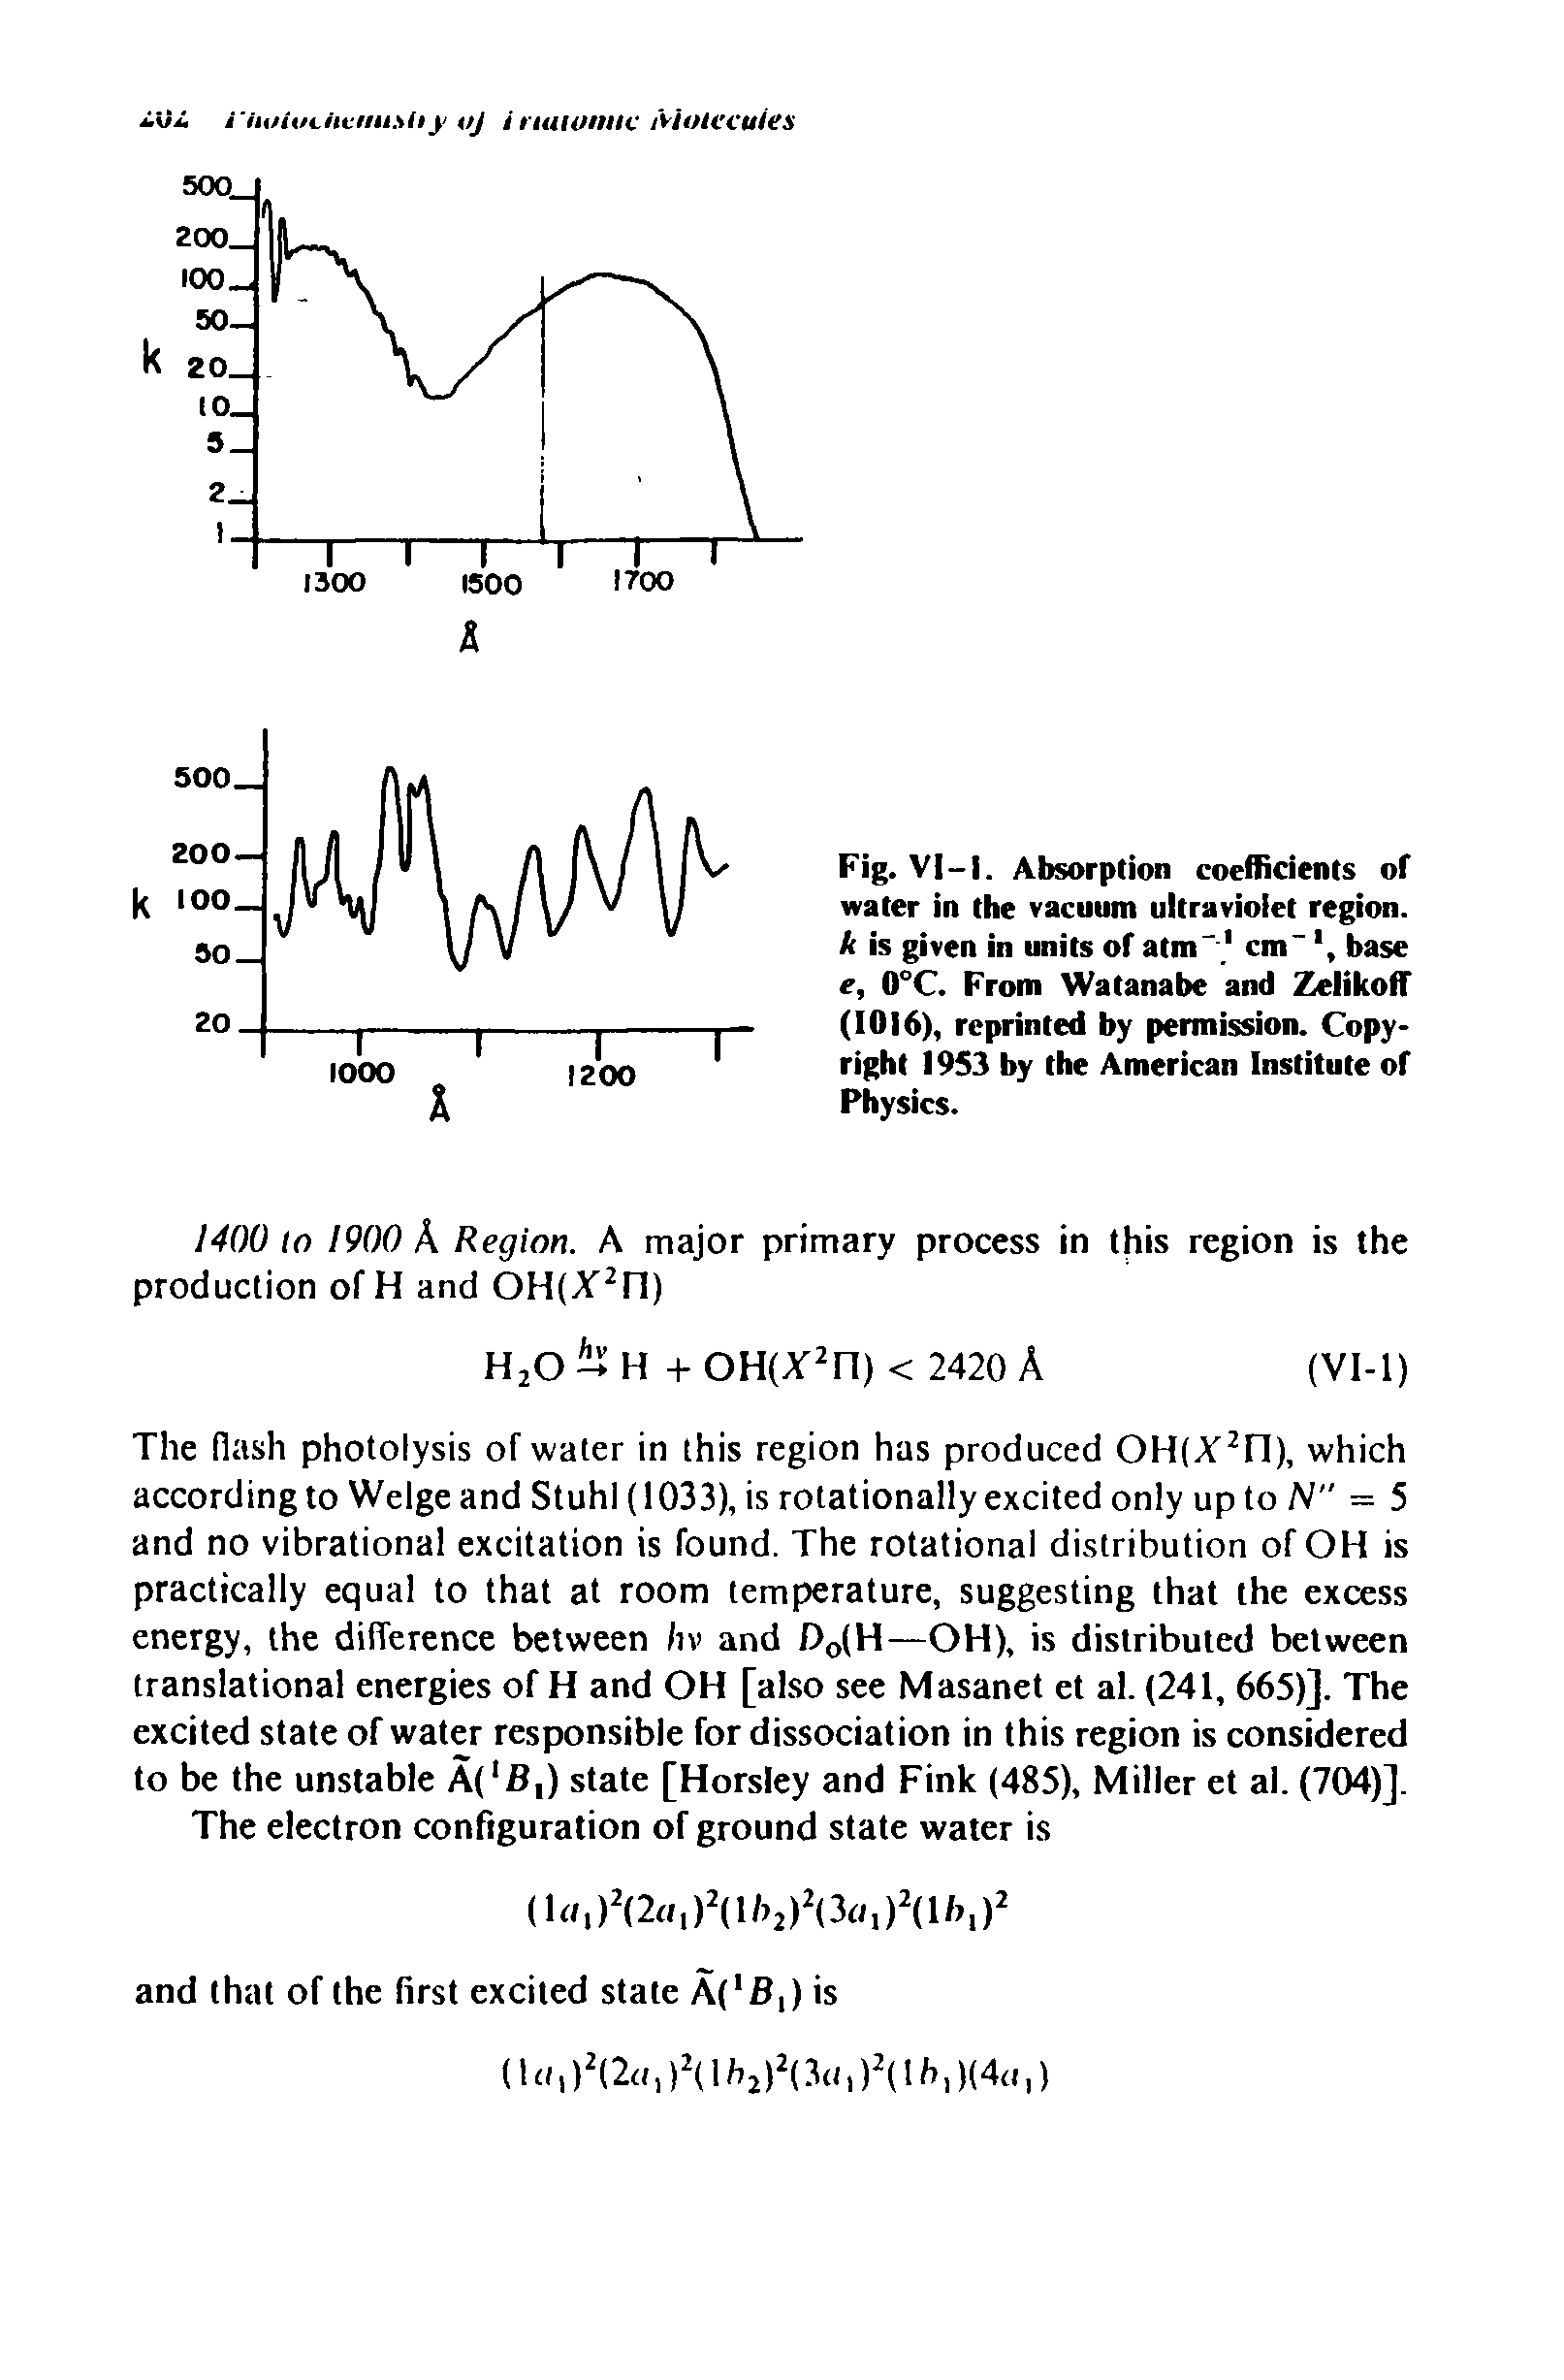 Fig. VI —I. Absorption coefficients of water in the vacuum ultraviolet region. k is given in units of atm-.1 cm"base e, 0°C. From Watanabe and Zelikotf (1016), reprinted by permission. Copyright 1953 by the American Institute of Physics.